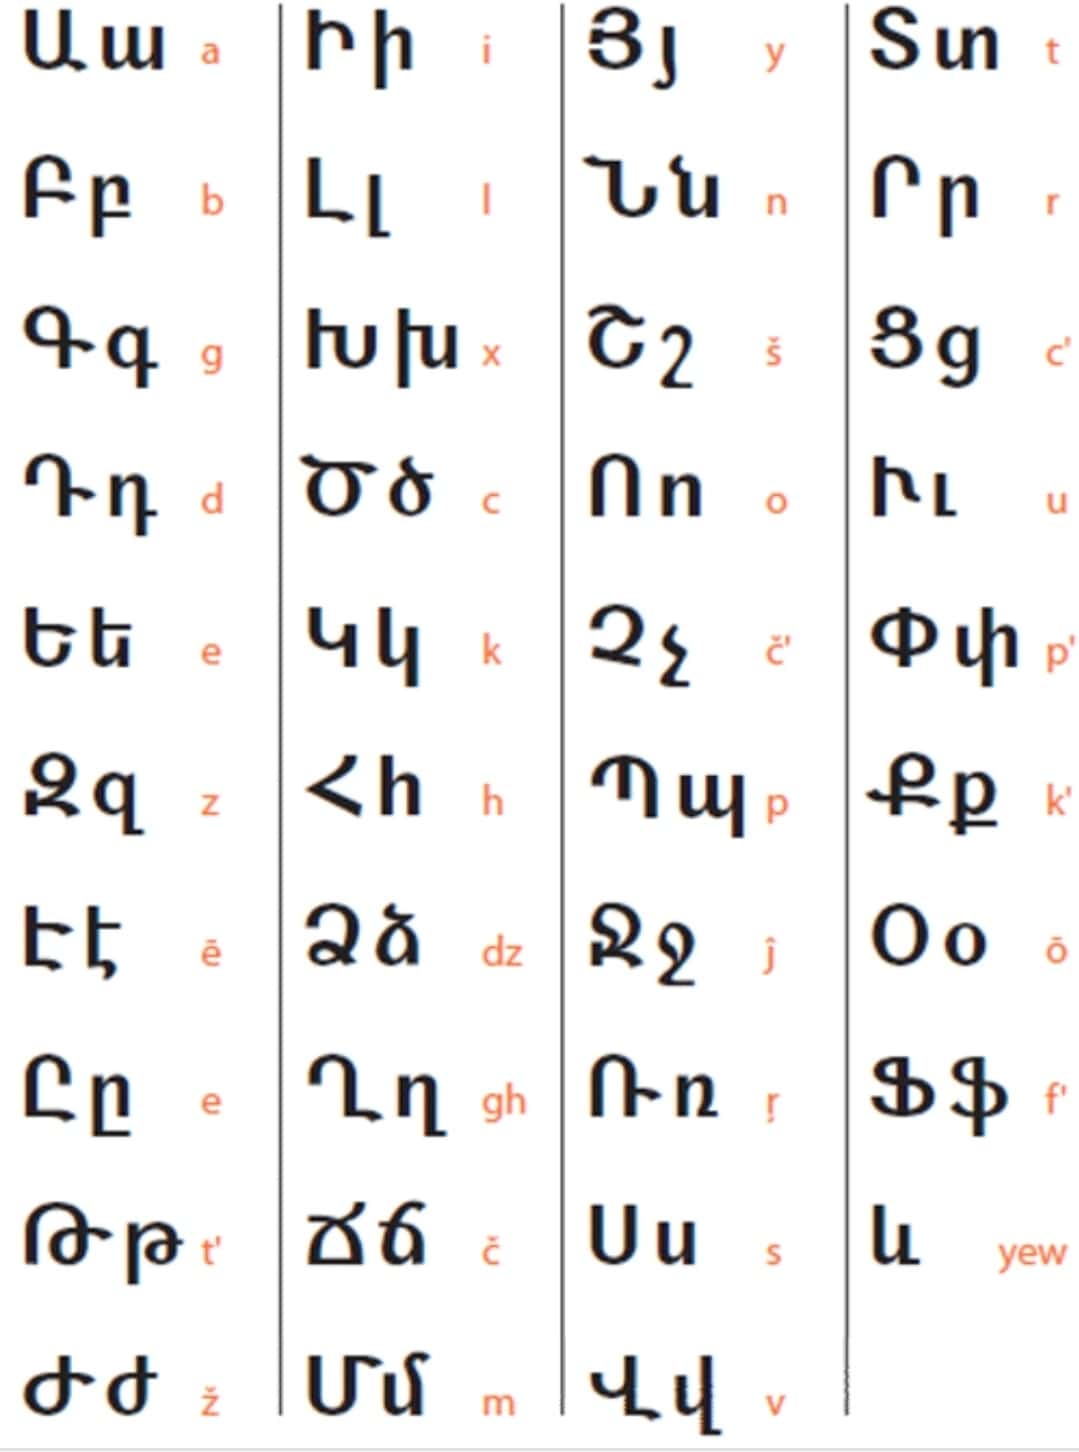 How Did We End With 38 Letters? - Armenian Prelacy